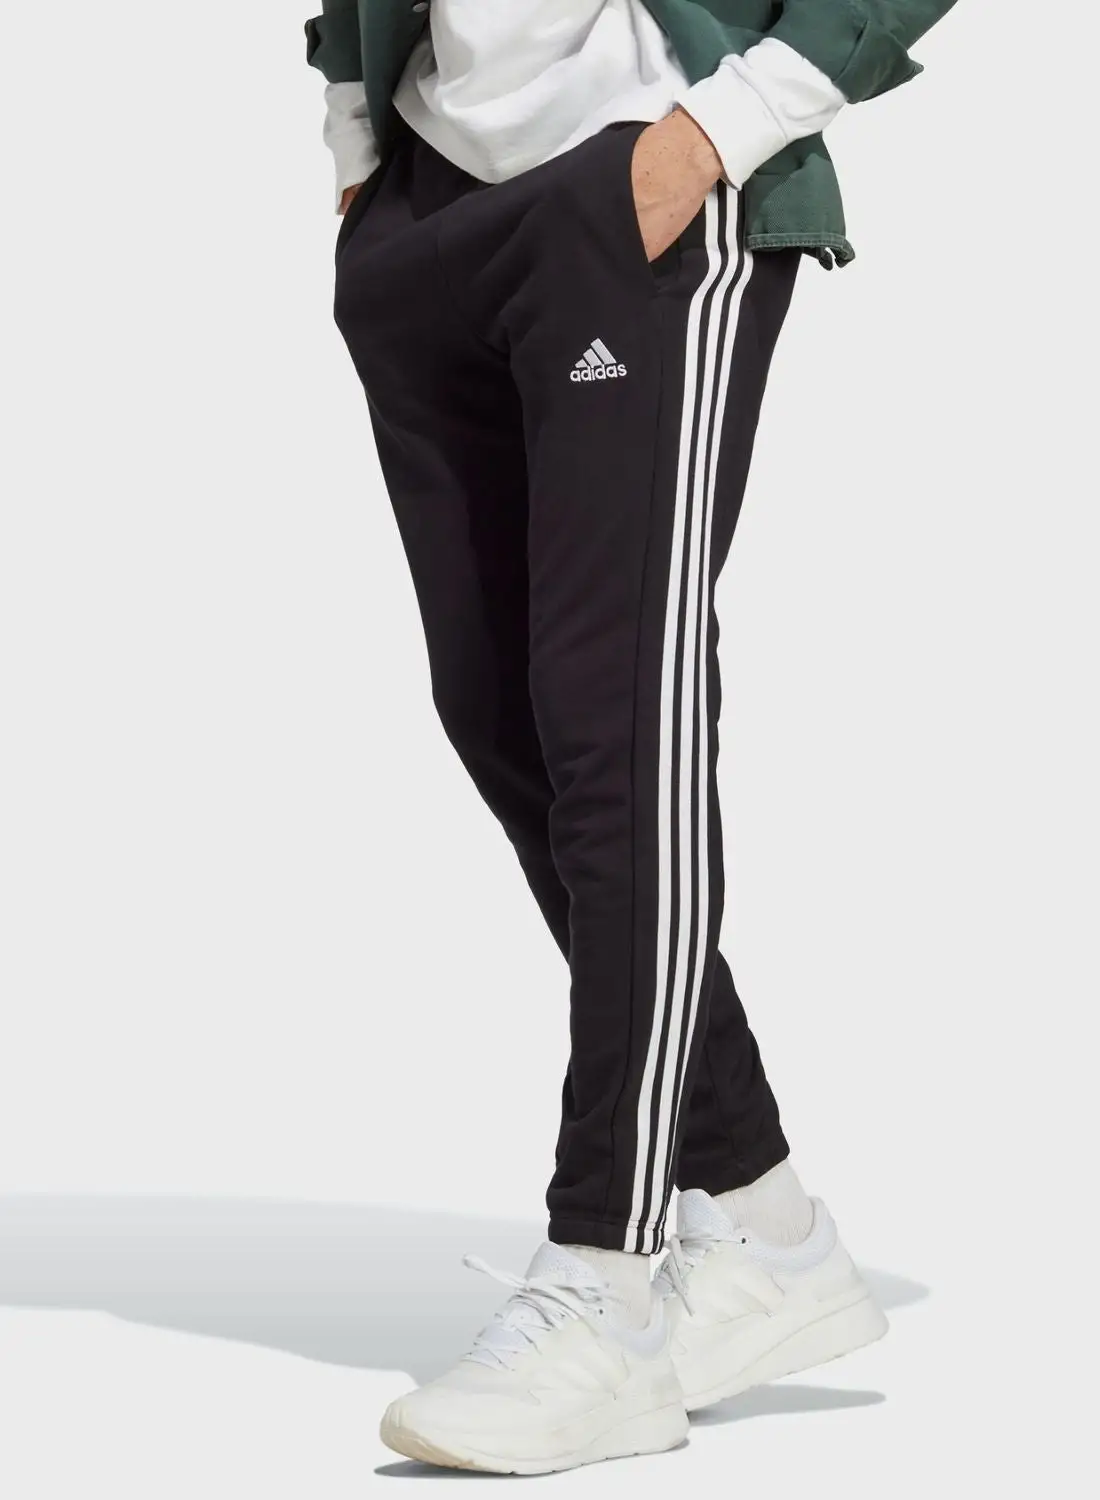 Adidas 3 Stripes French Terry Pants